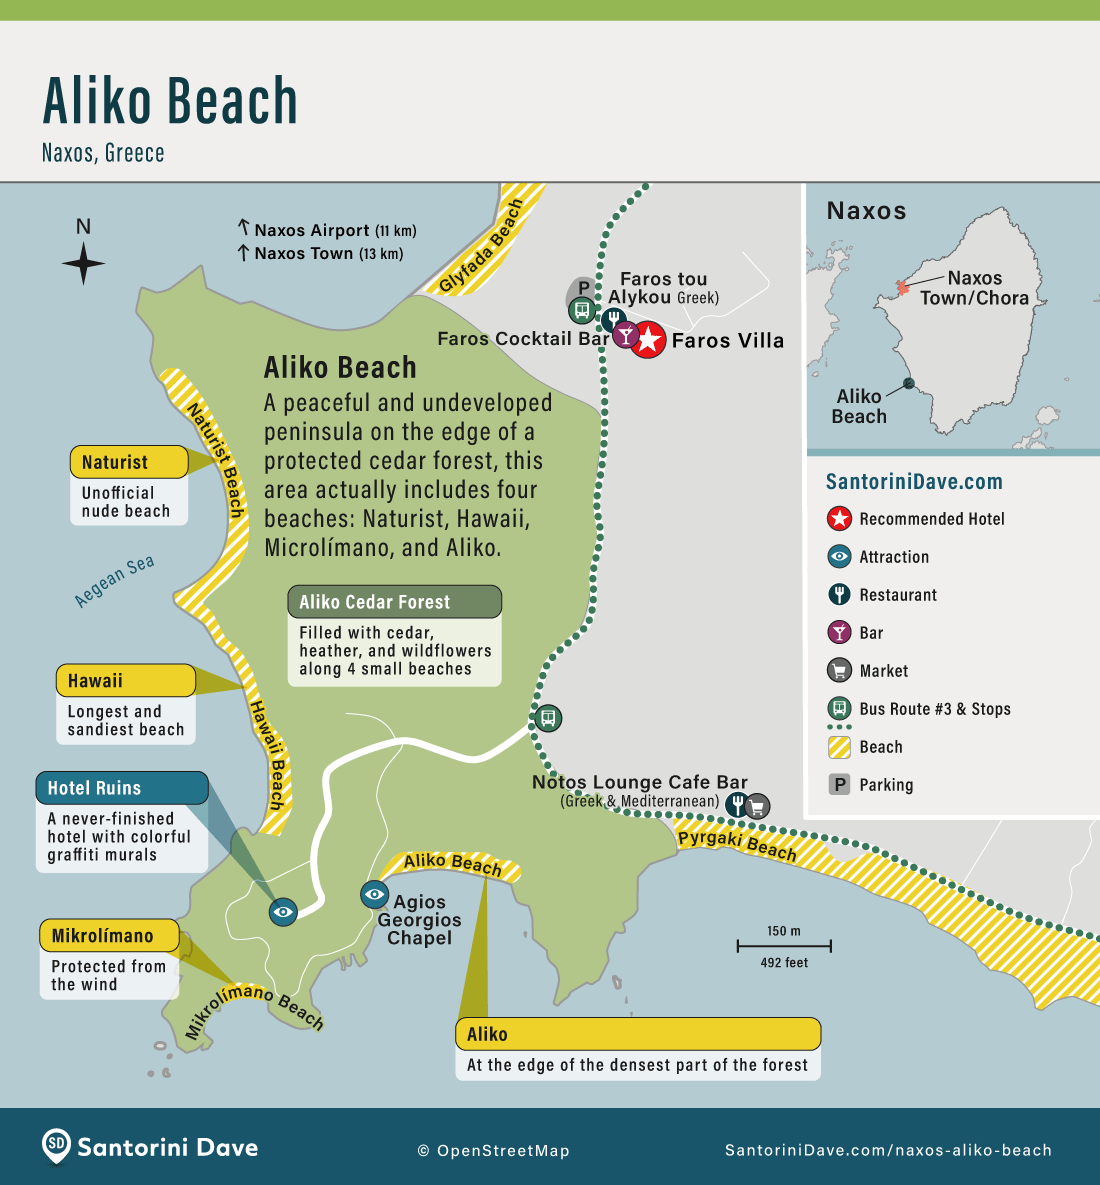 Map showing the locations, features, bus routes, and facilities at Aliko Beach on Naxos.